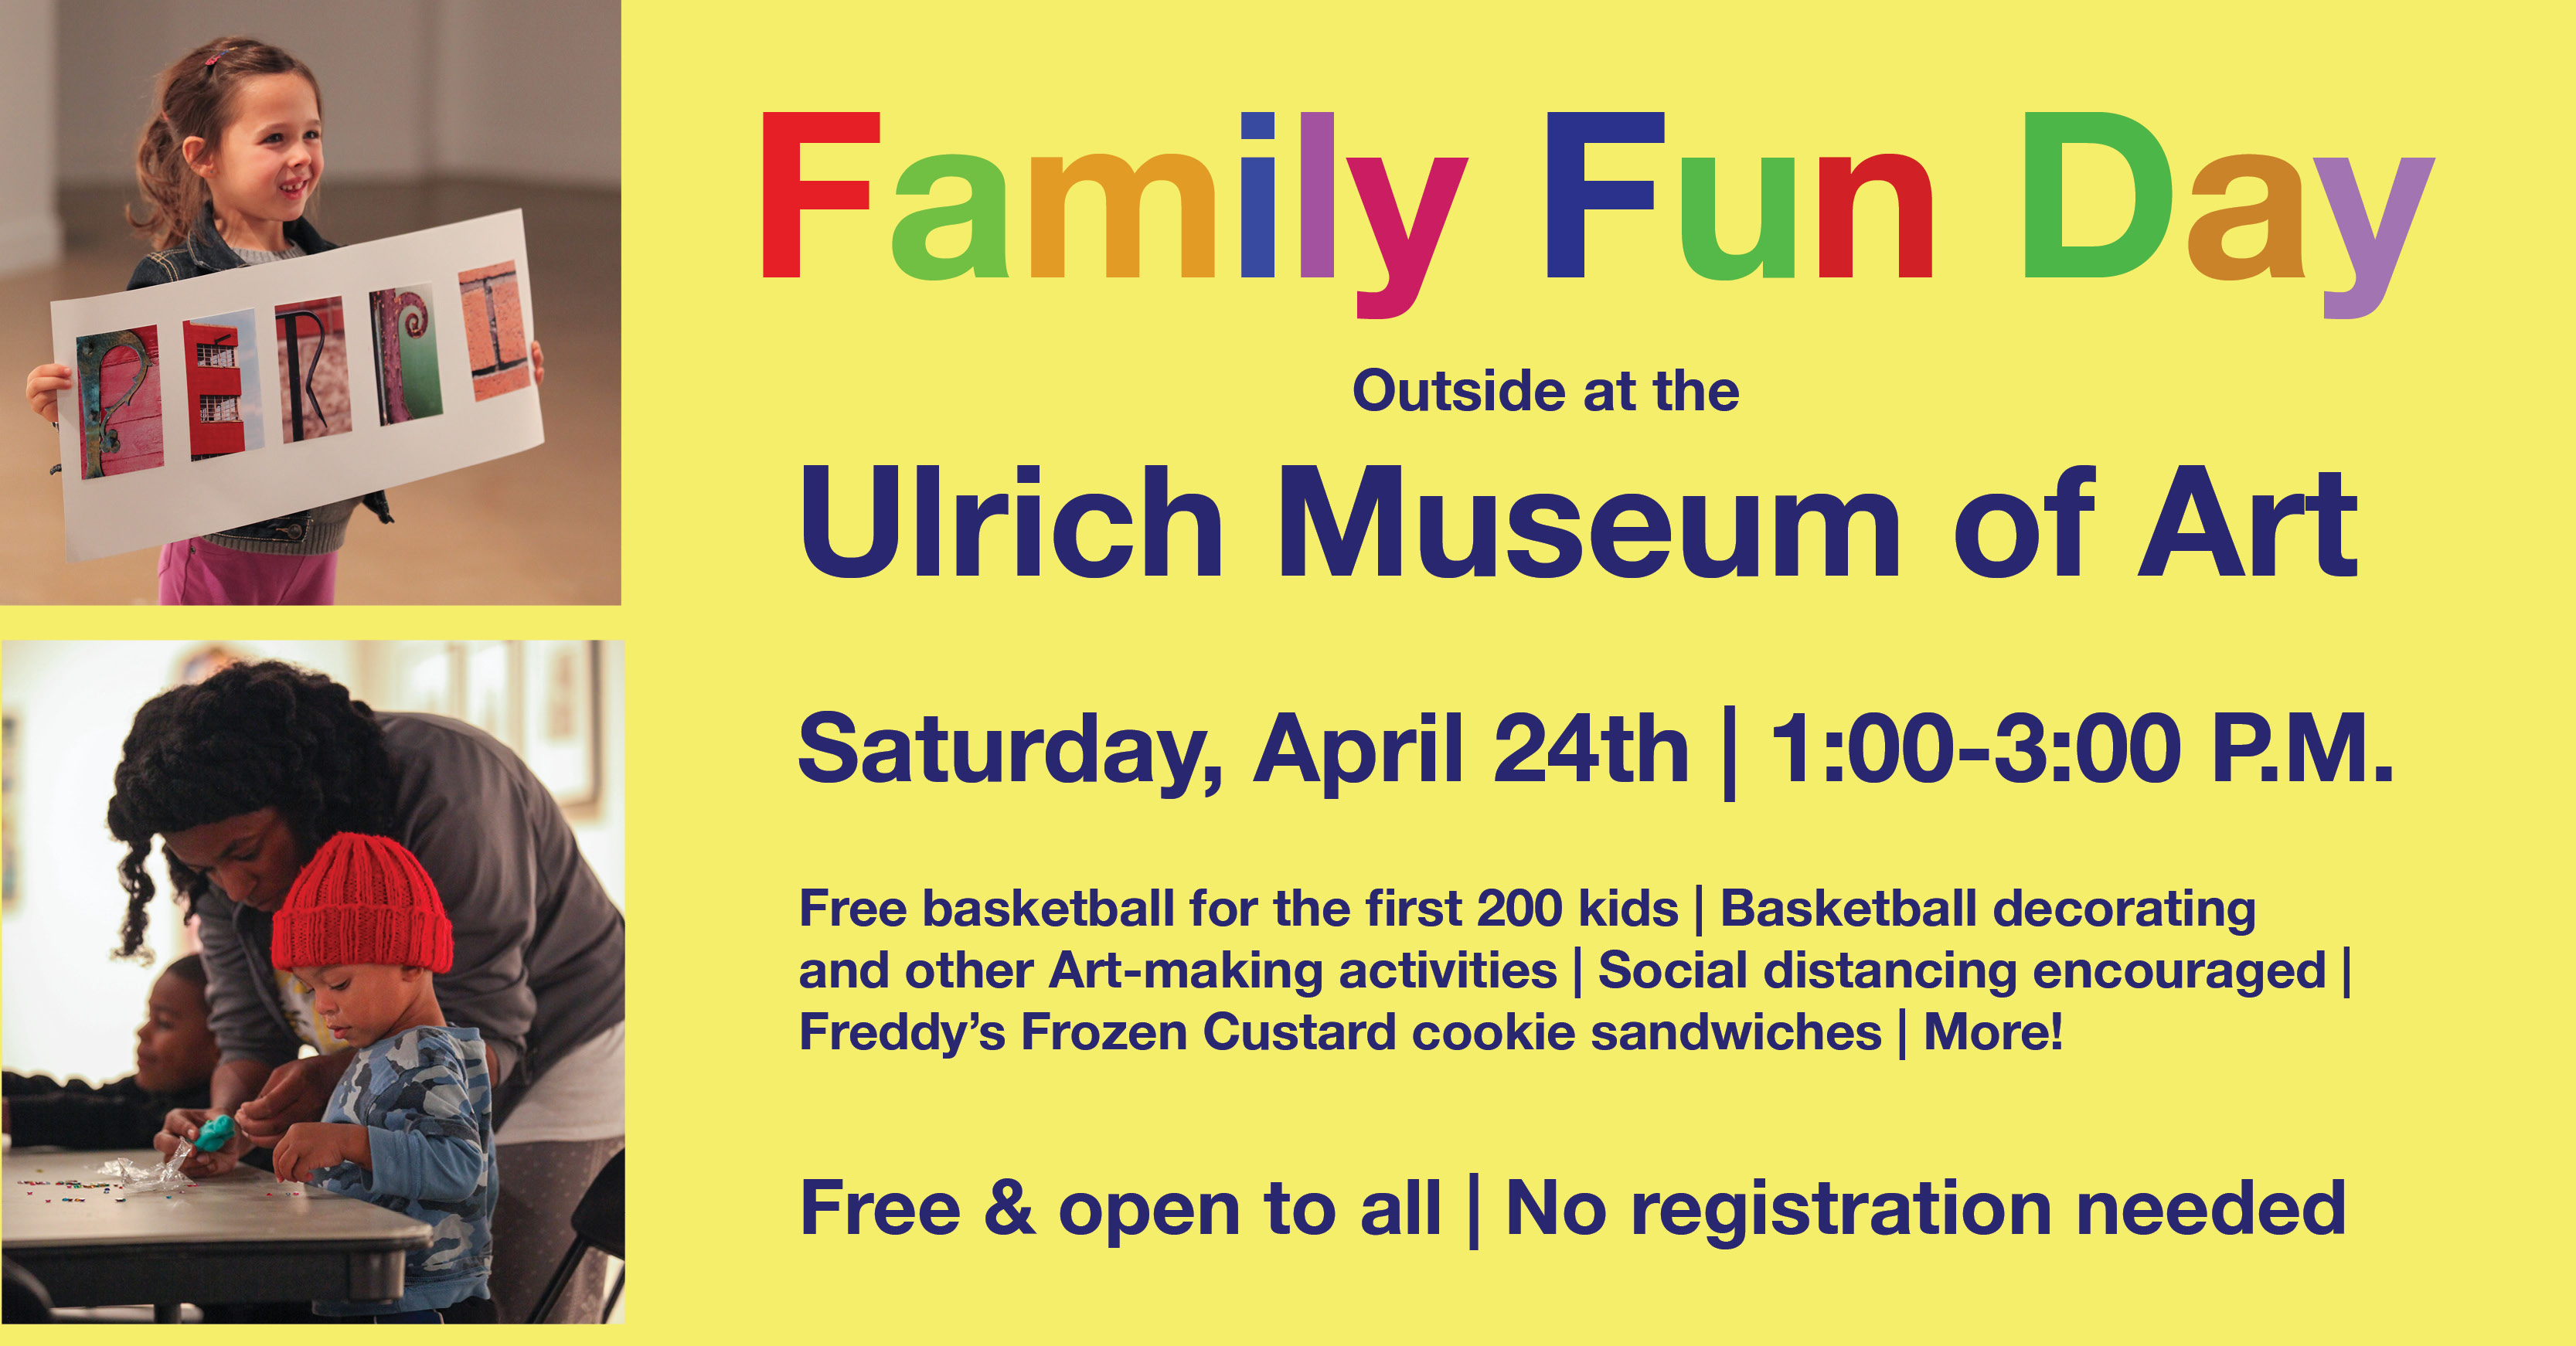 Family Fun Day outside at the Ulrich Museum. Saturday, April 24th, 1-3 P.M. Free basketball for the first 200 kids, Basketball decorating and other Art-making activities, Social distancing encouraged, Freddy’s Frozen Custard cookie sandwiches, and more! Free and open to all. No registration required.